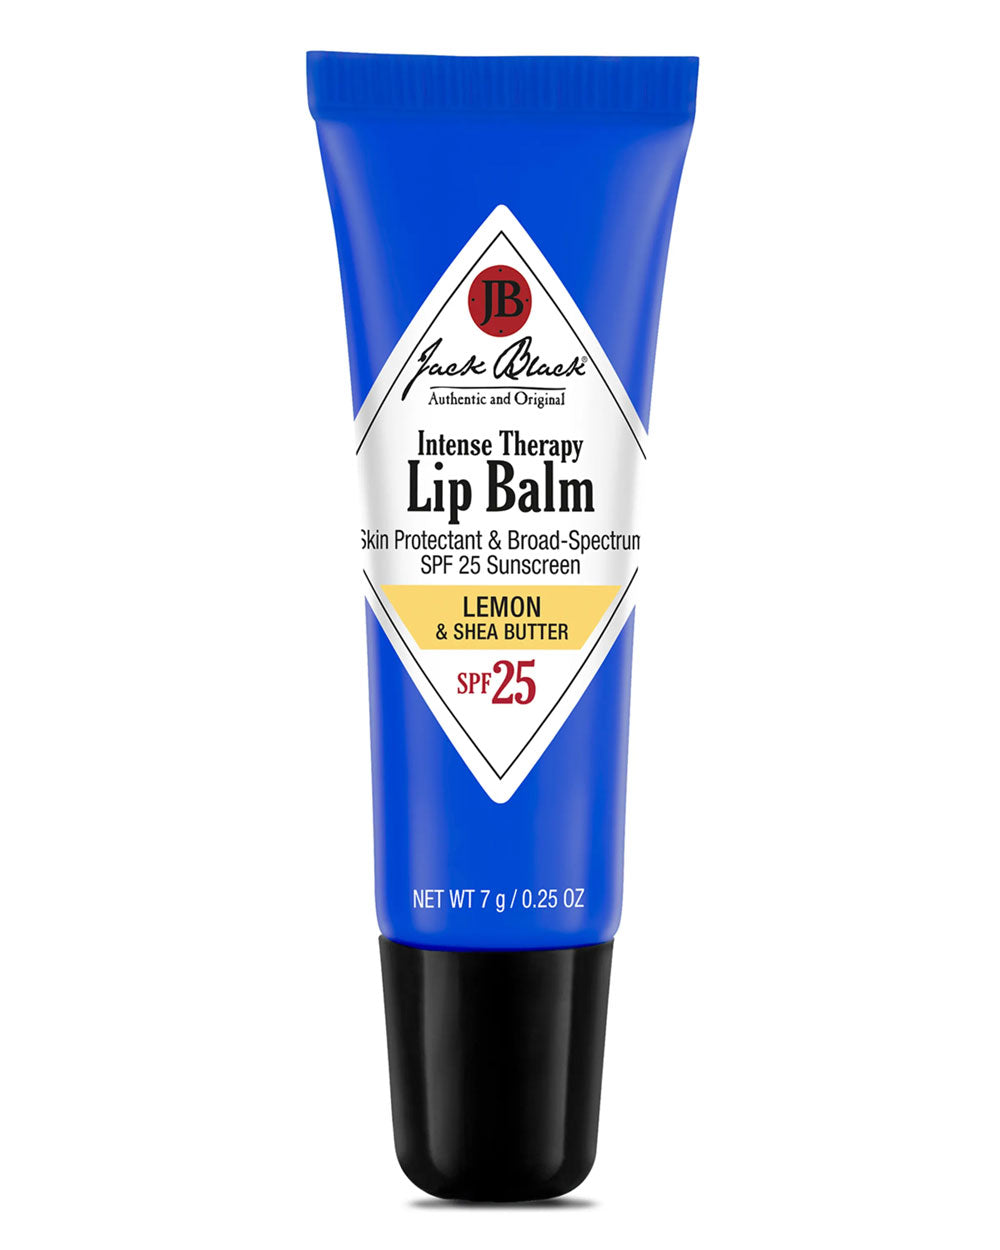 Intense Therapy Lip Balm with Lemon and Shea Butter